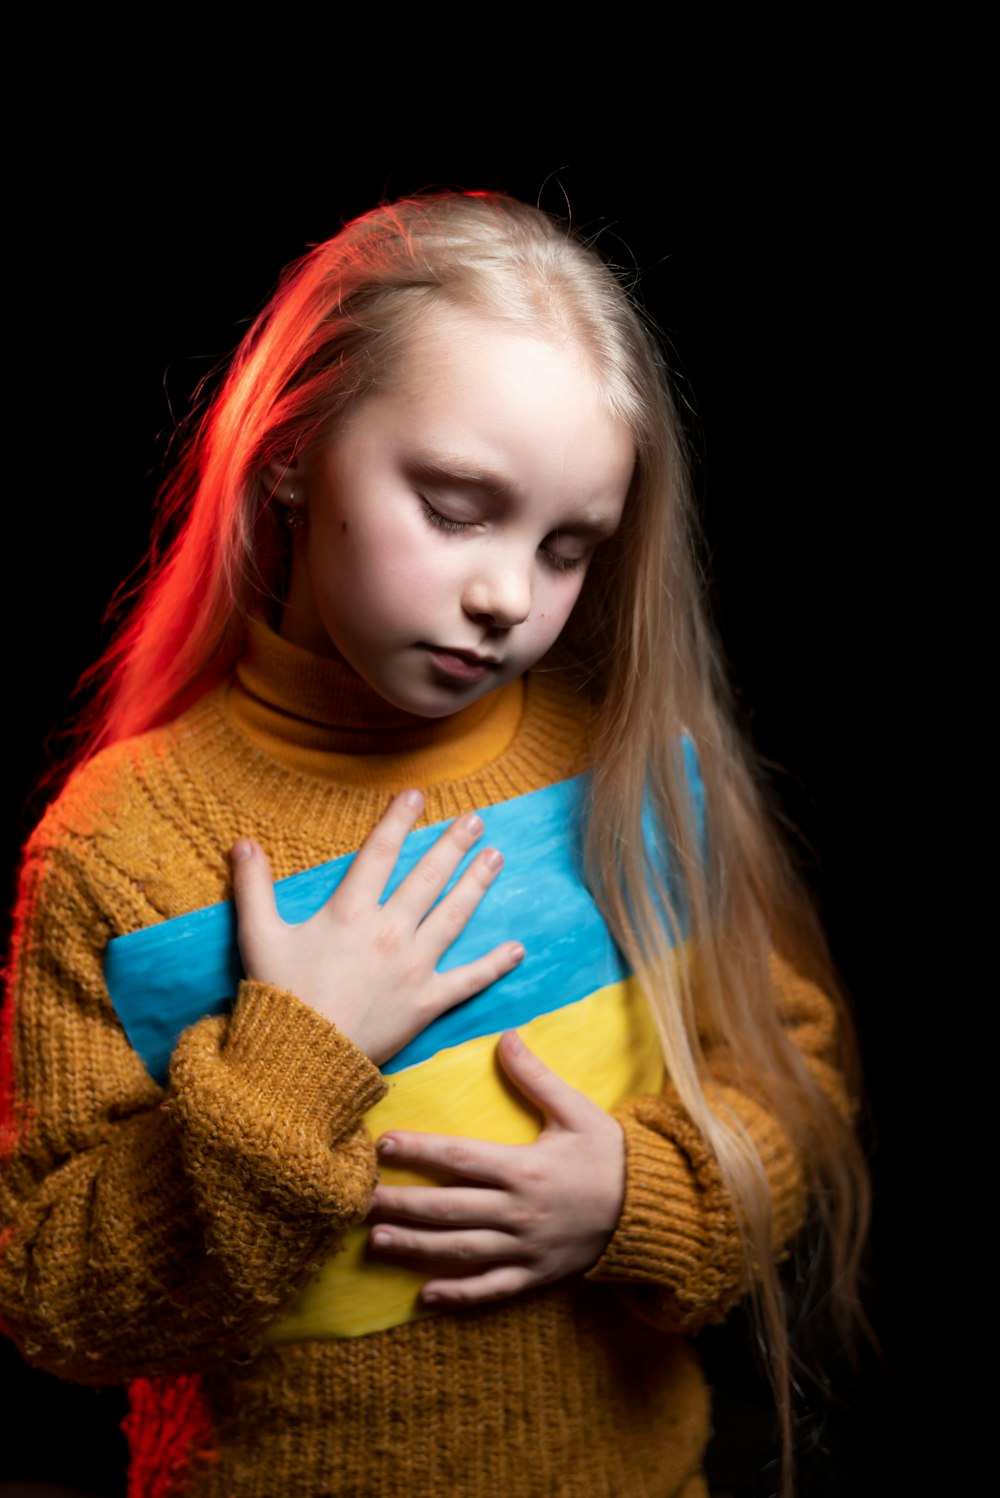 a young girl holding a stuffed animal in her arms